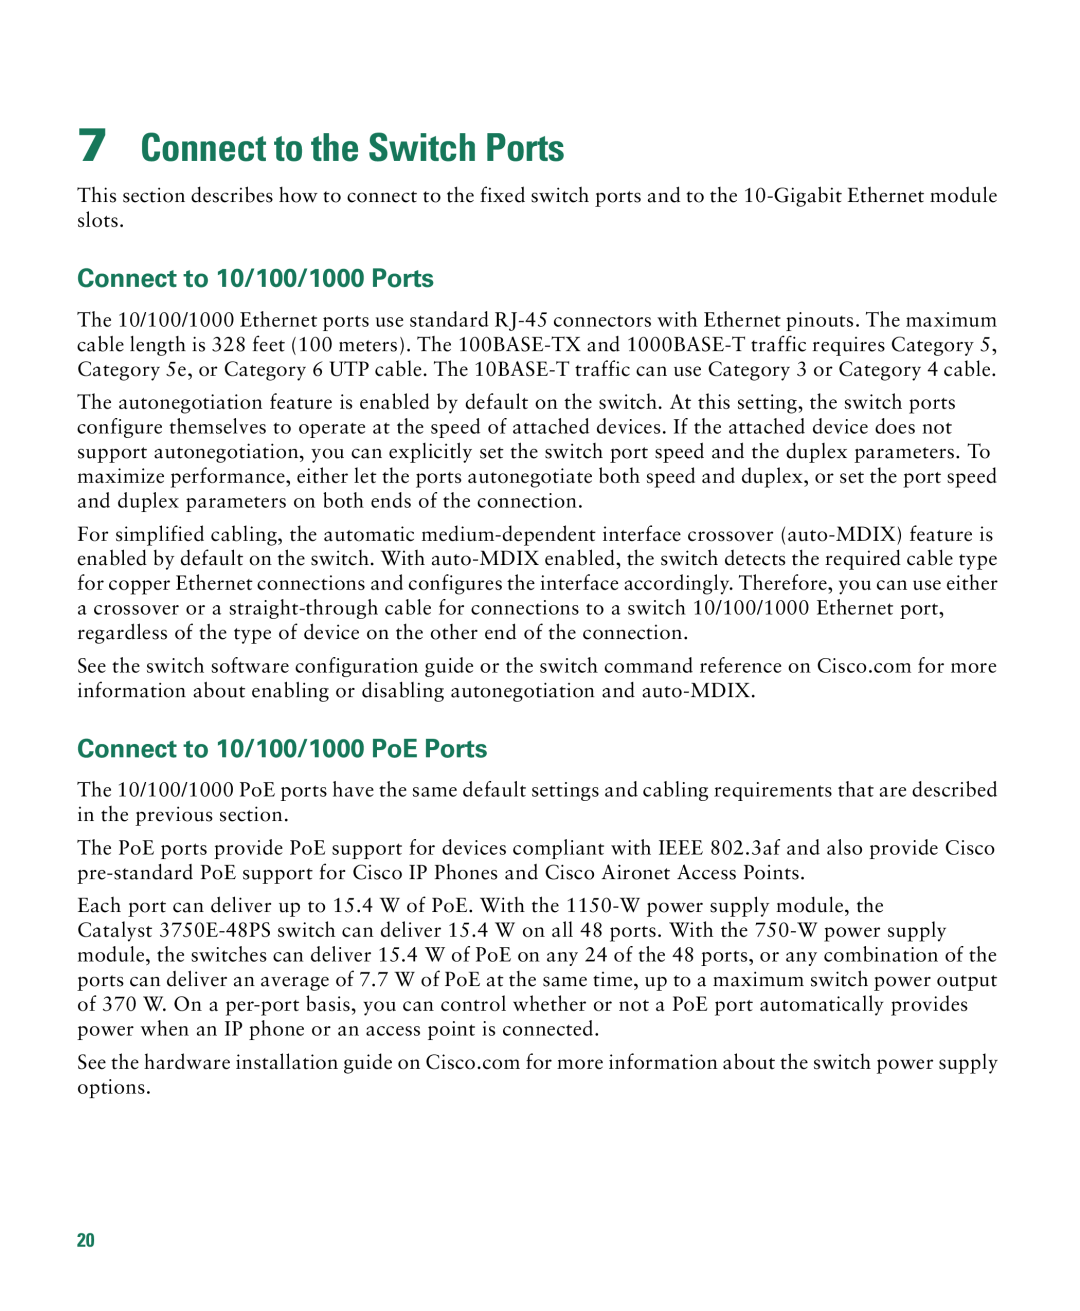 Cisco Systems 3750E-48PD-F Connect to the Switch Ports, Connect to 10/100/1000 Ports, Connect to 10/100/1000 PoE Ports 